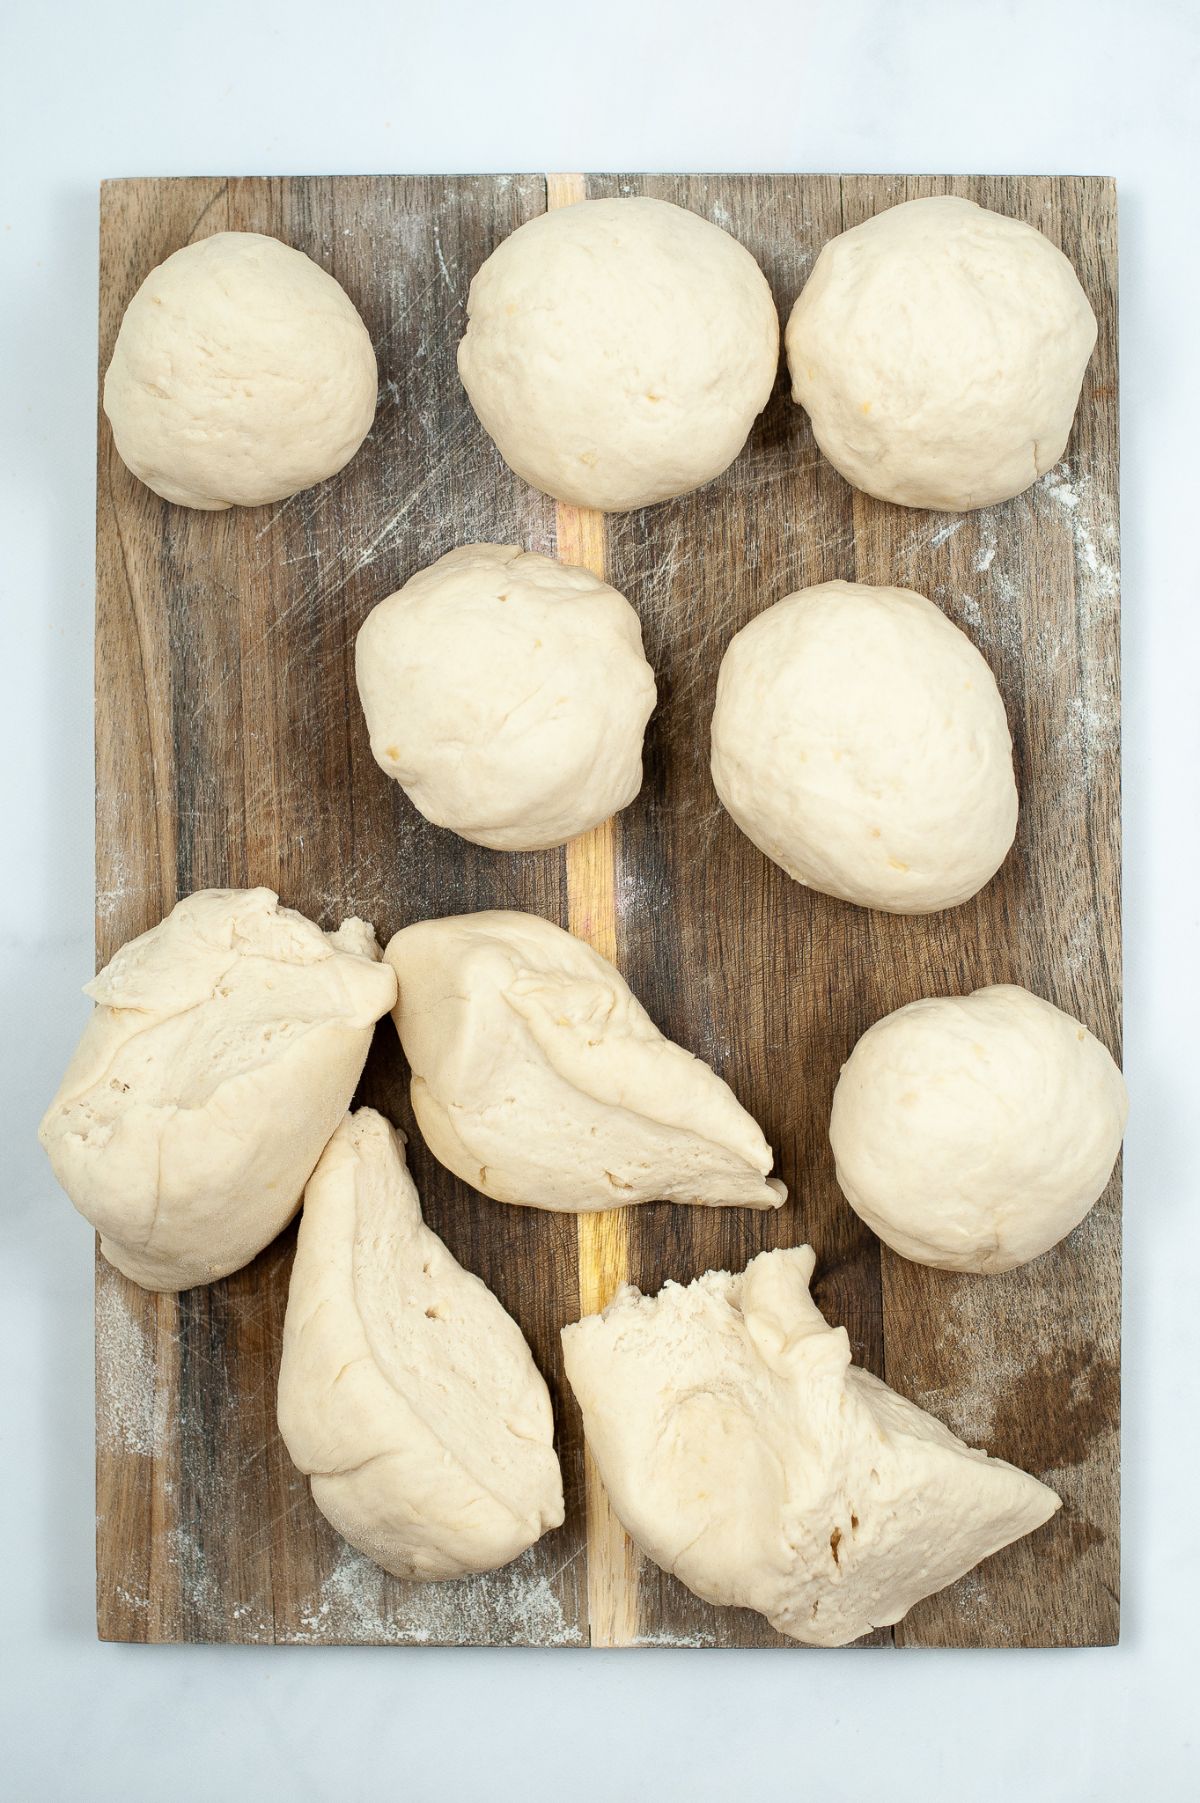 10 parts of dough shaped into a ball on floured flat surface.